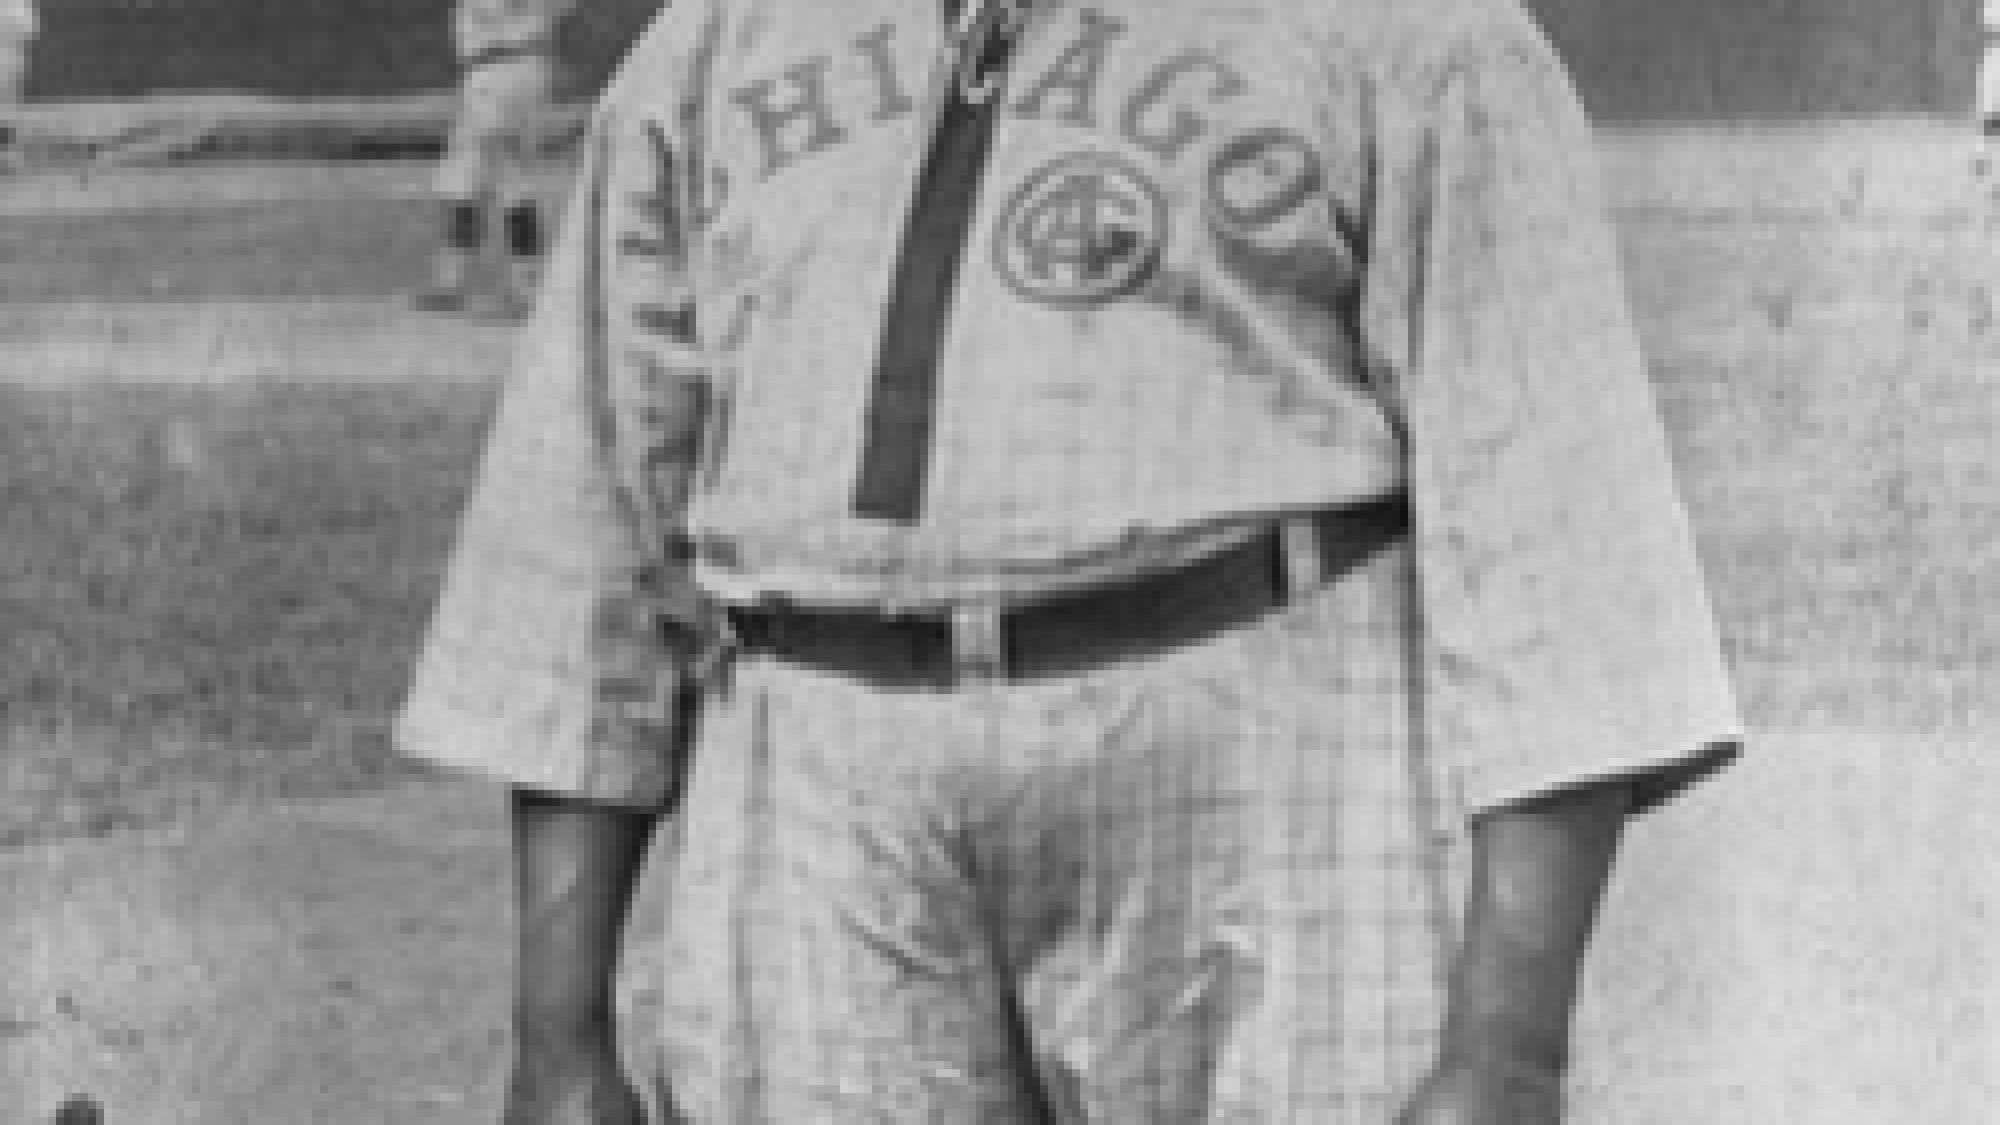 A former pitcher, Rube Foster was serving as both president of the Negro National League and owner-manager of the Chicago American Giants in 1921. (National Baseball Hall of Fame and Museum)